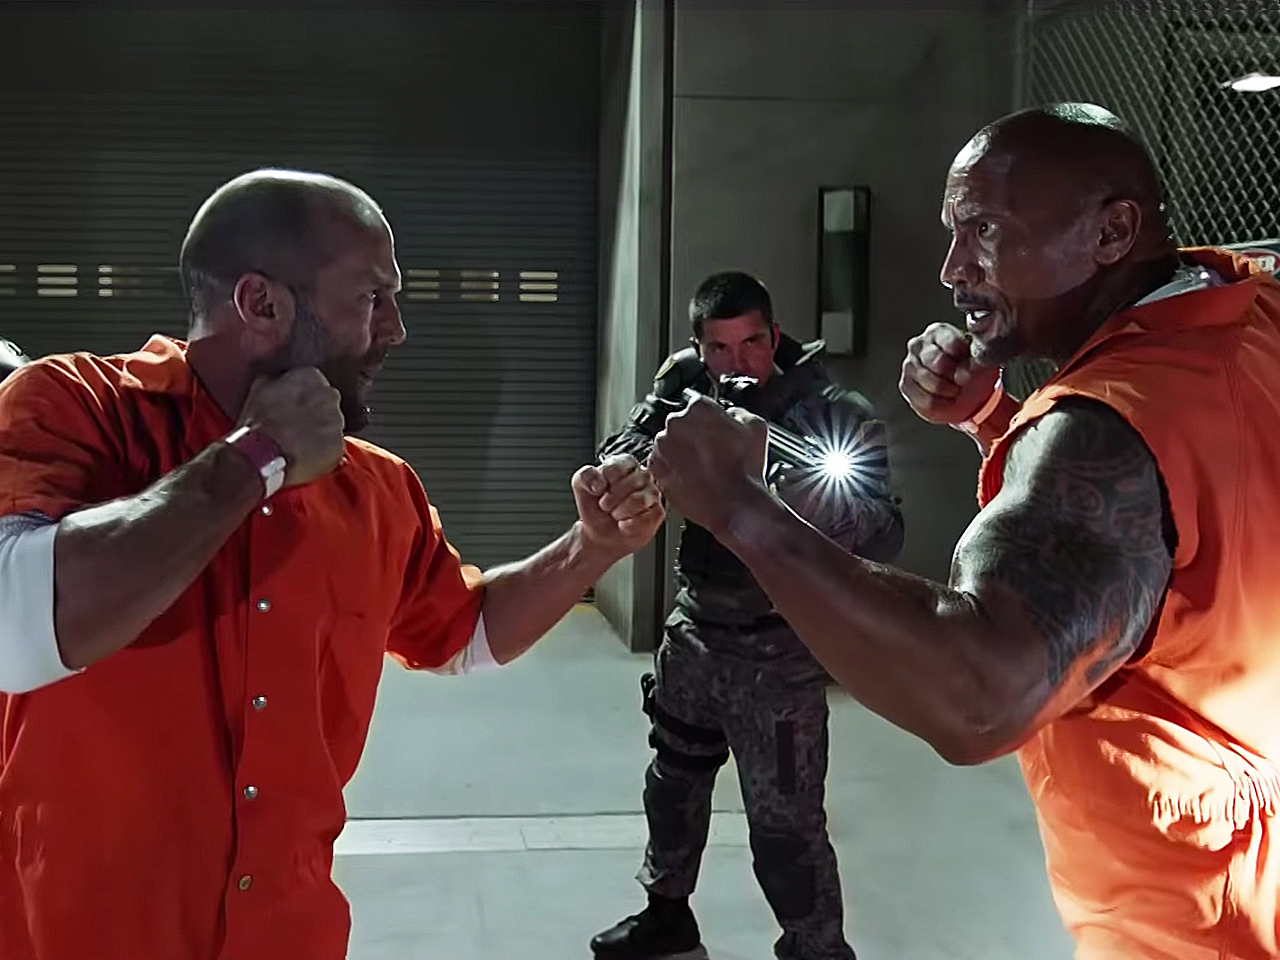 Jason Statham and The Rock face off in The Fate of The Furious